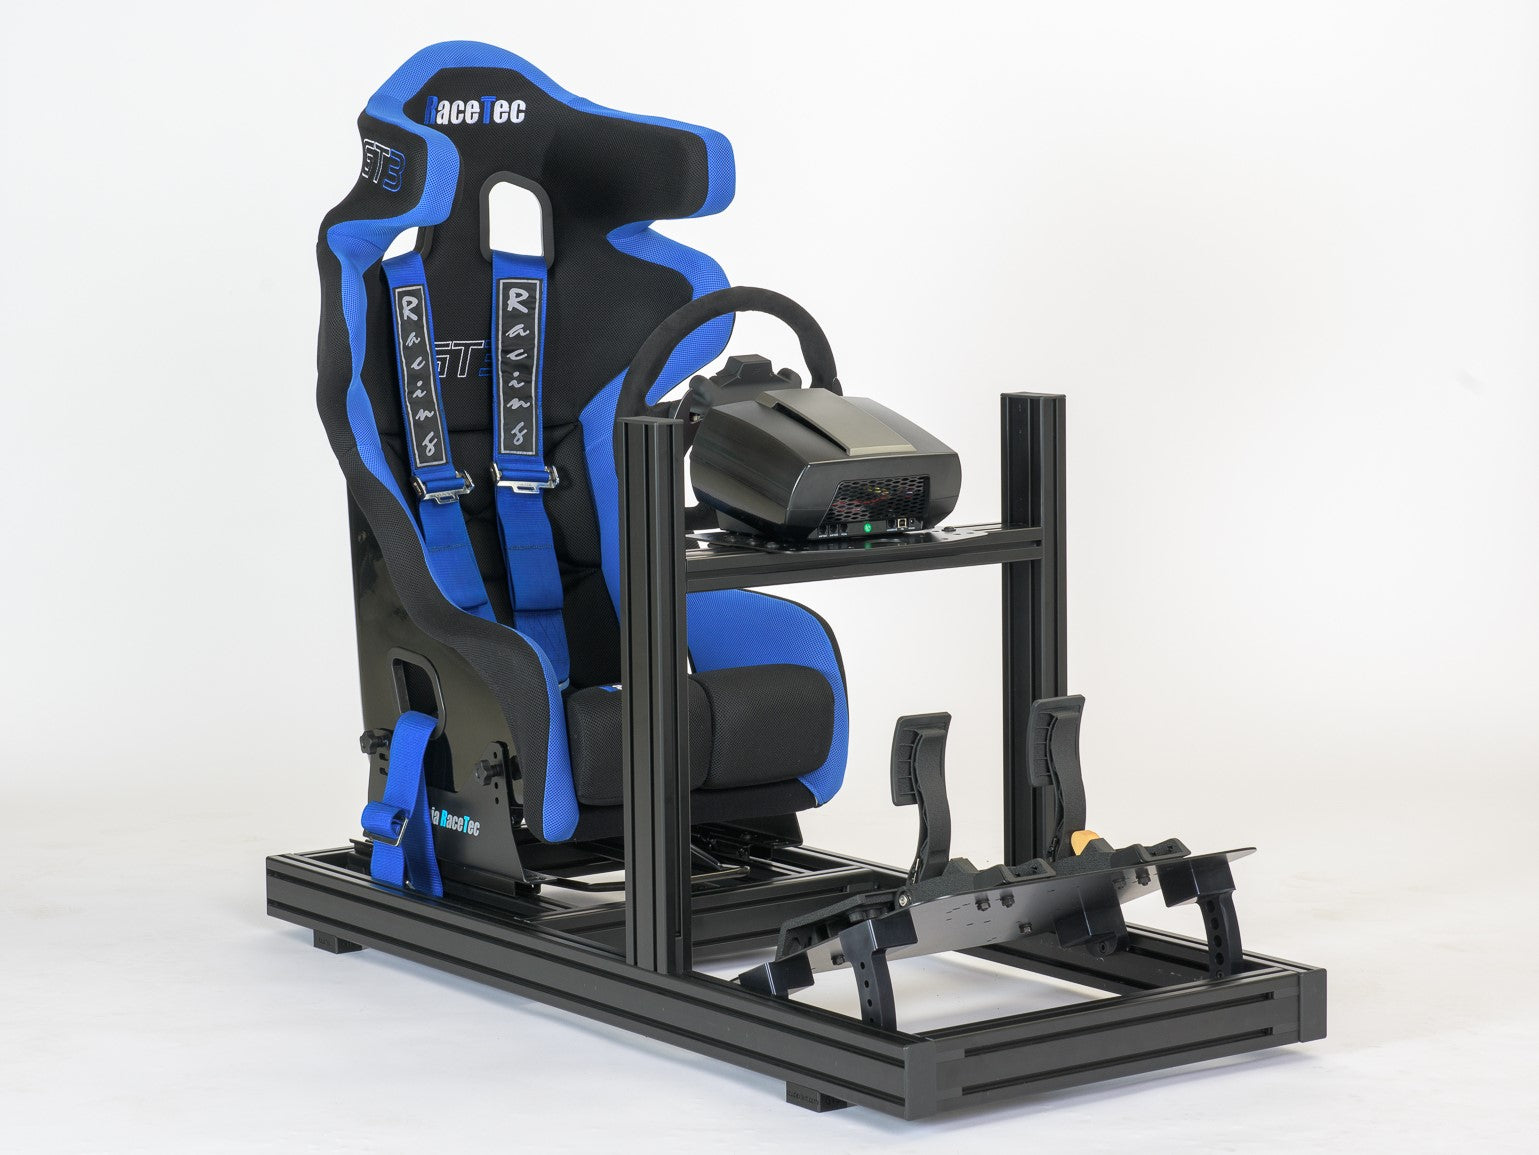 Simracing rig with a seat